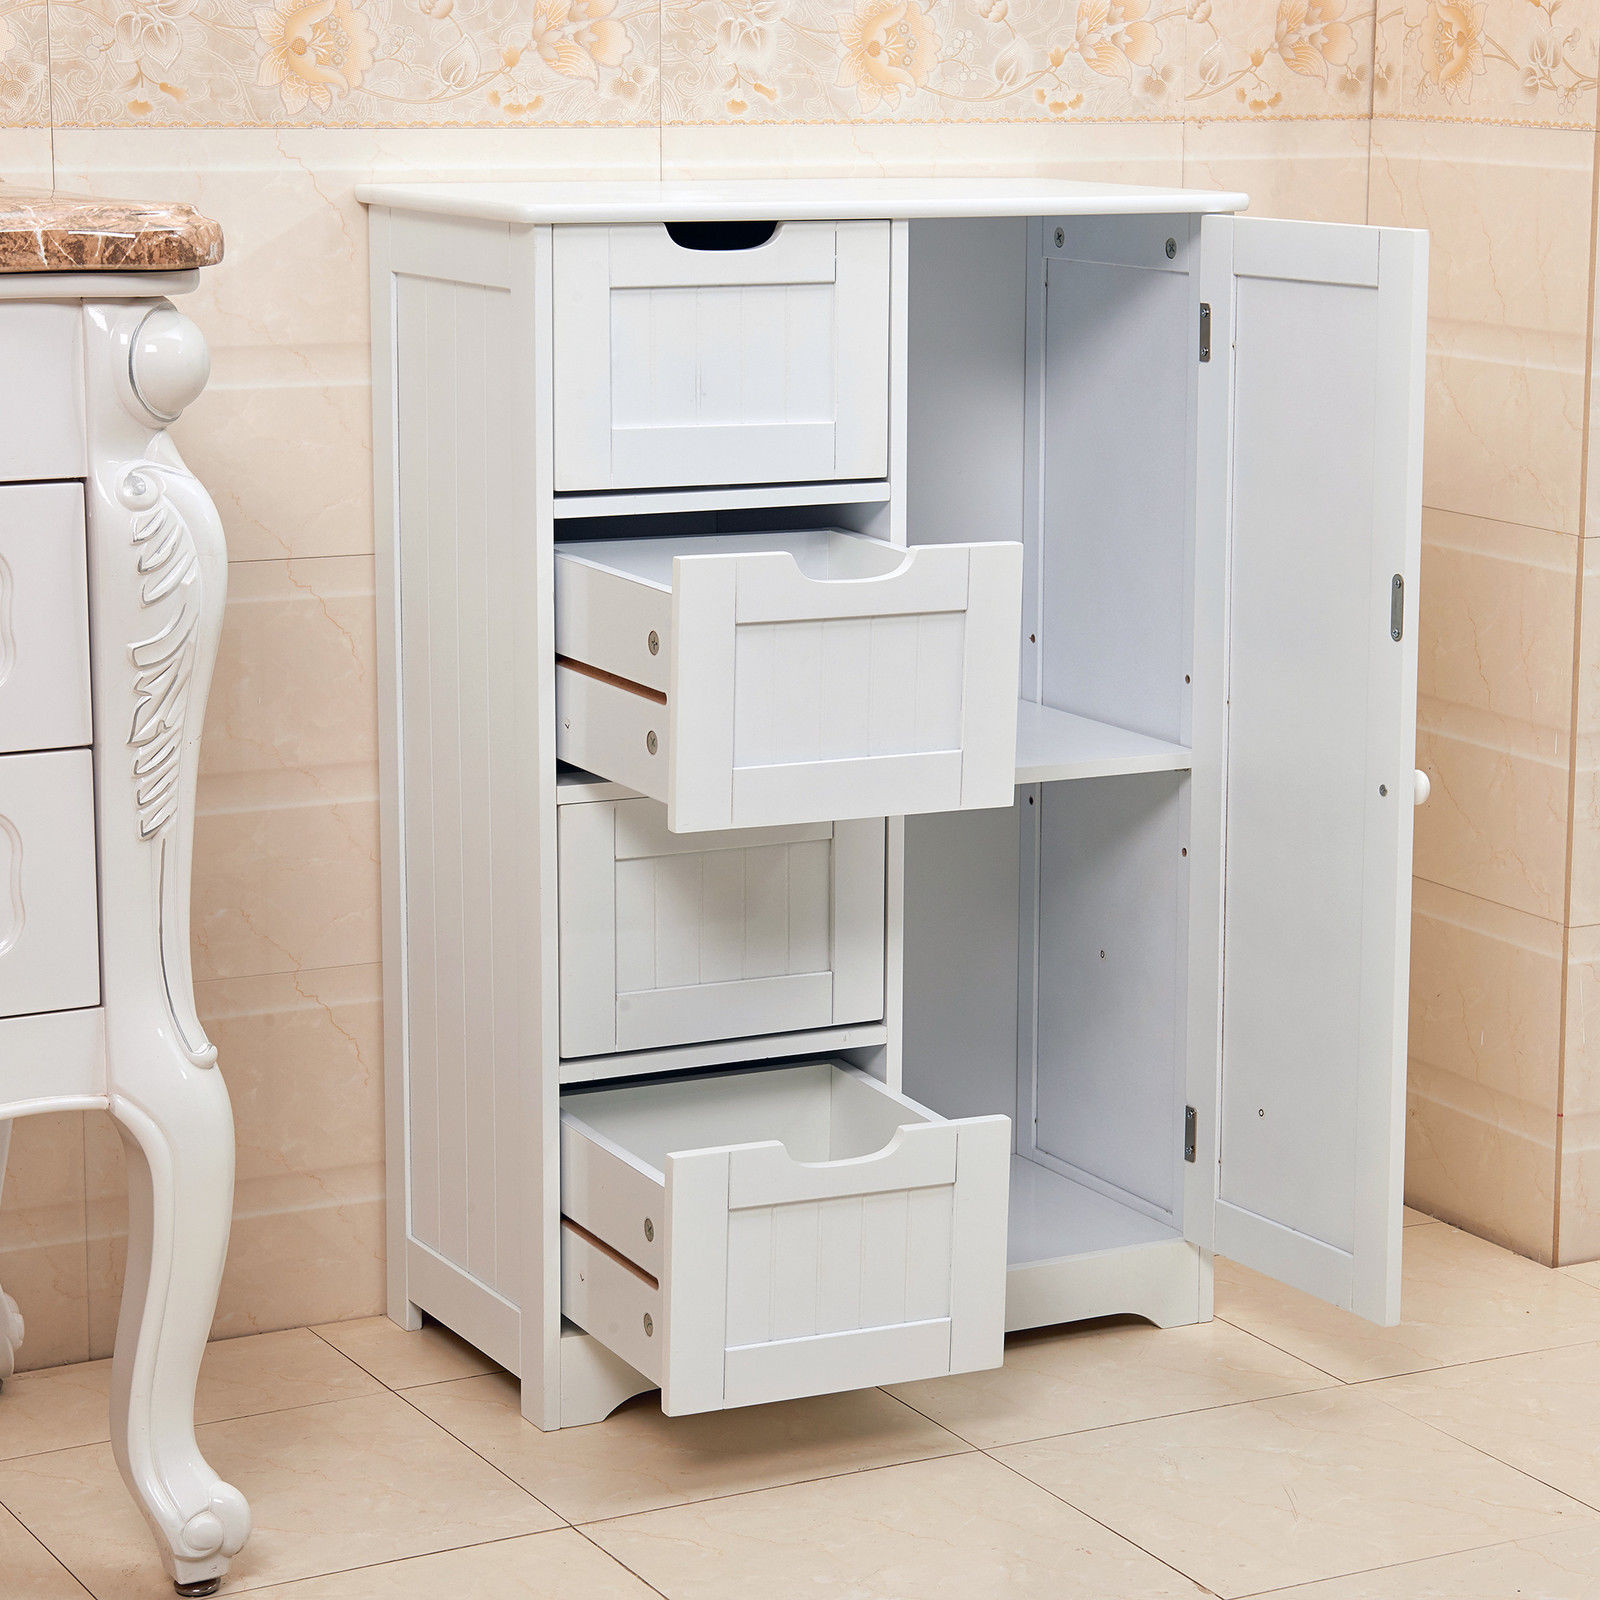 Bathroom Storage Cabinet With Drawers
 White Wooden 4 Drawer Bathroom Storage Cupboard Cabinet